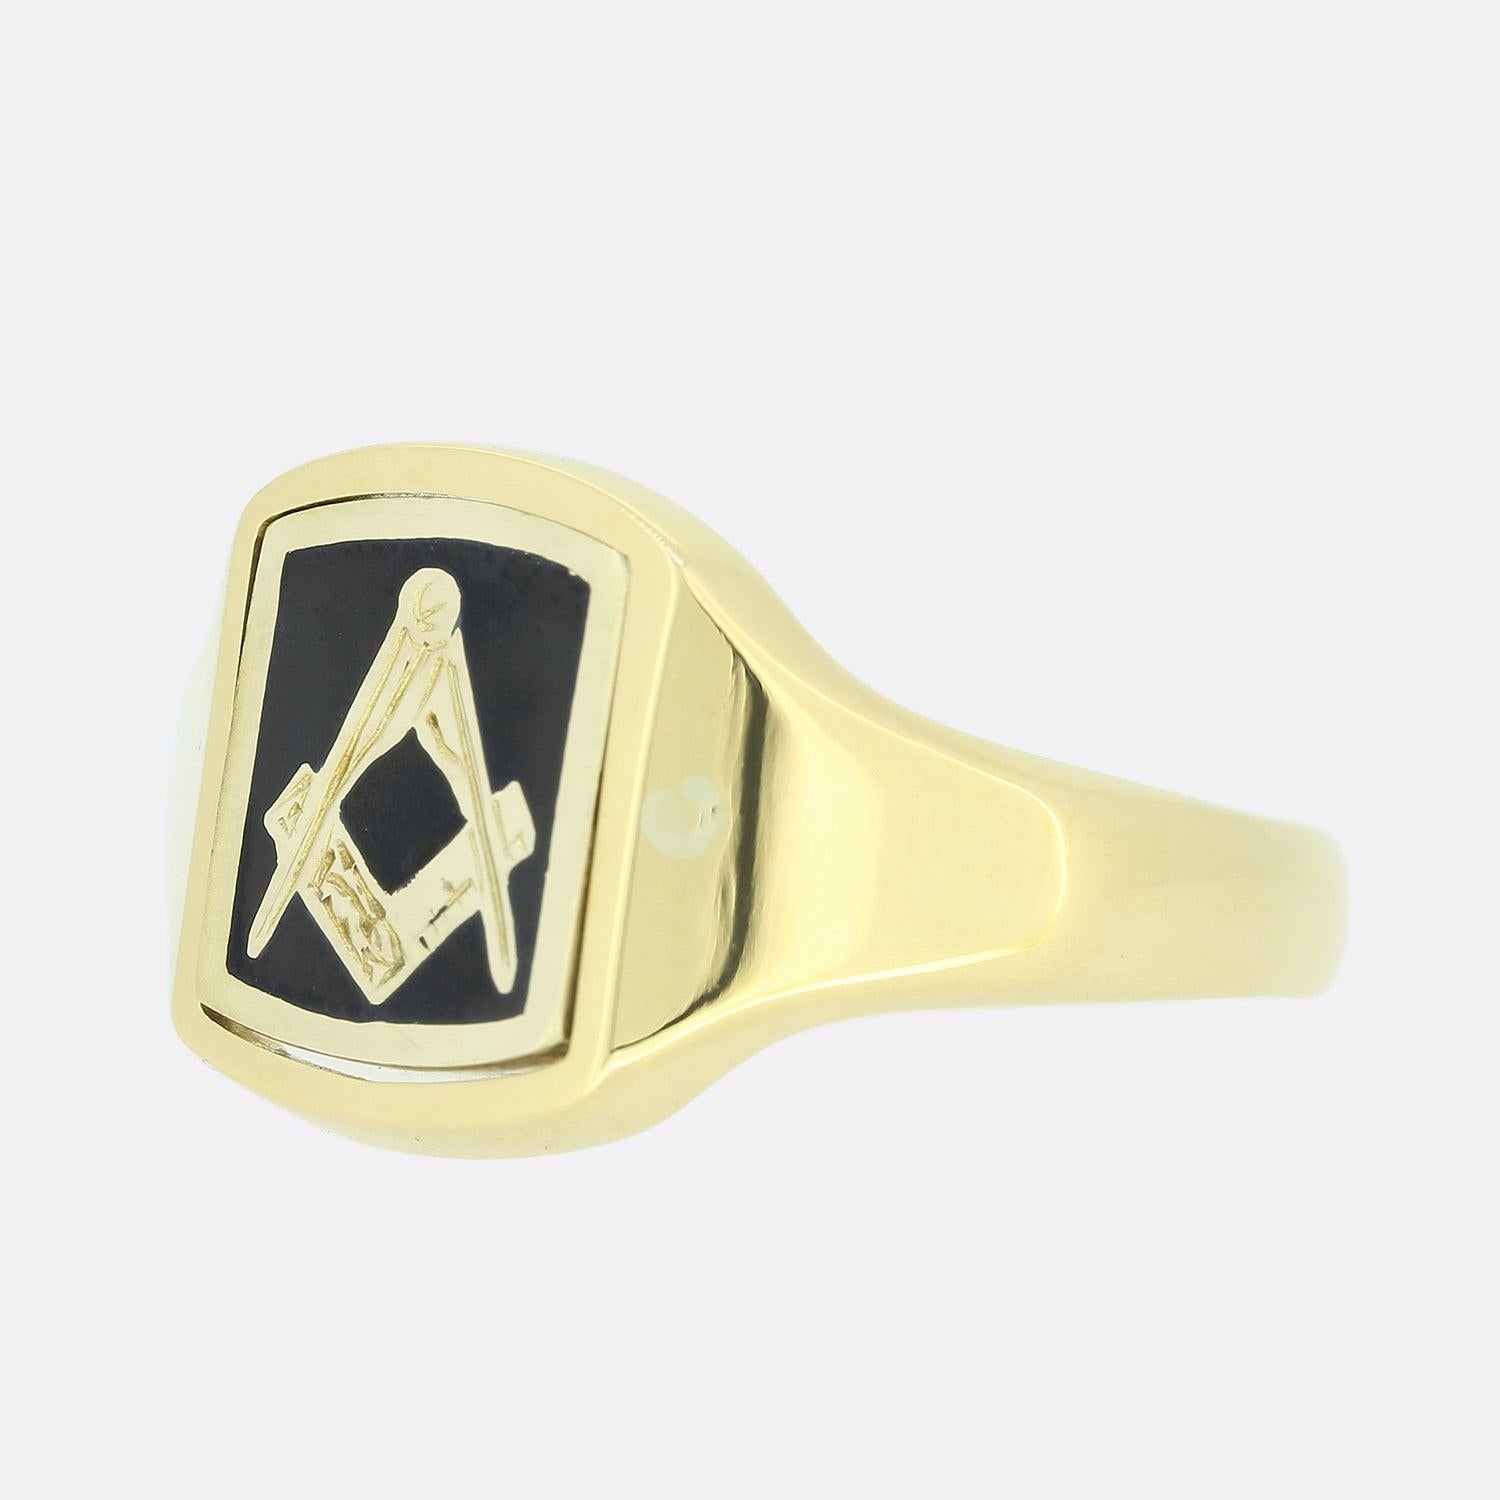 This is a vintage 18ct yellow gold spinning masonic signet ring. One side has a gold masonic symbol on black enamel backing and the other is plain and unembellished. The face is a rectangular shape with rounded corners.

Condition: Used